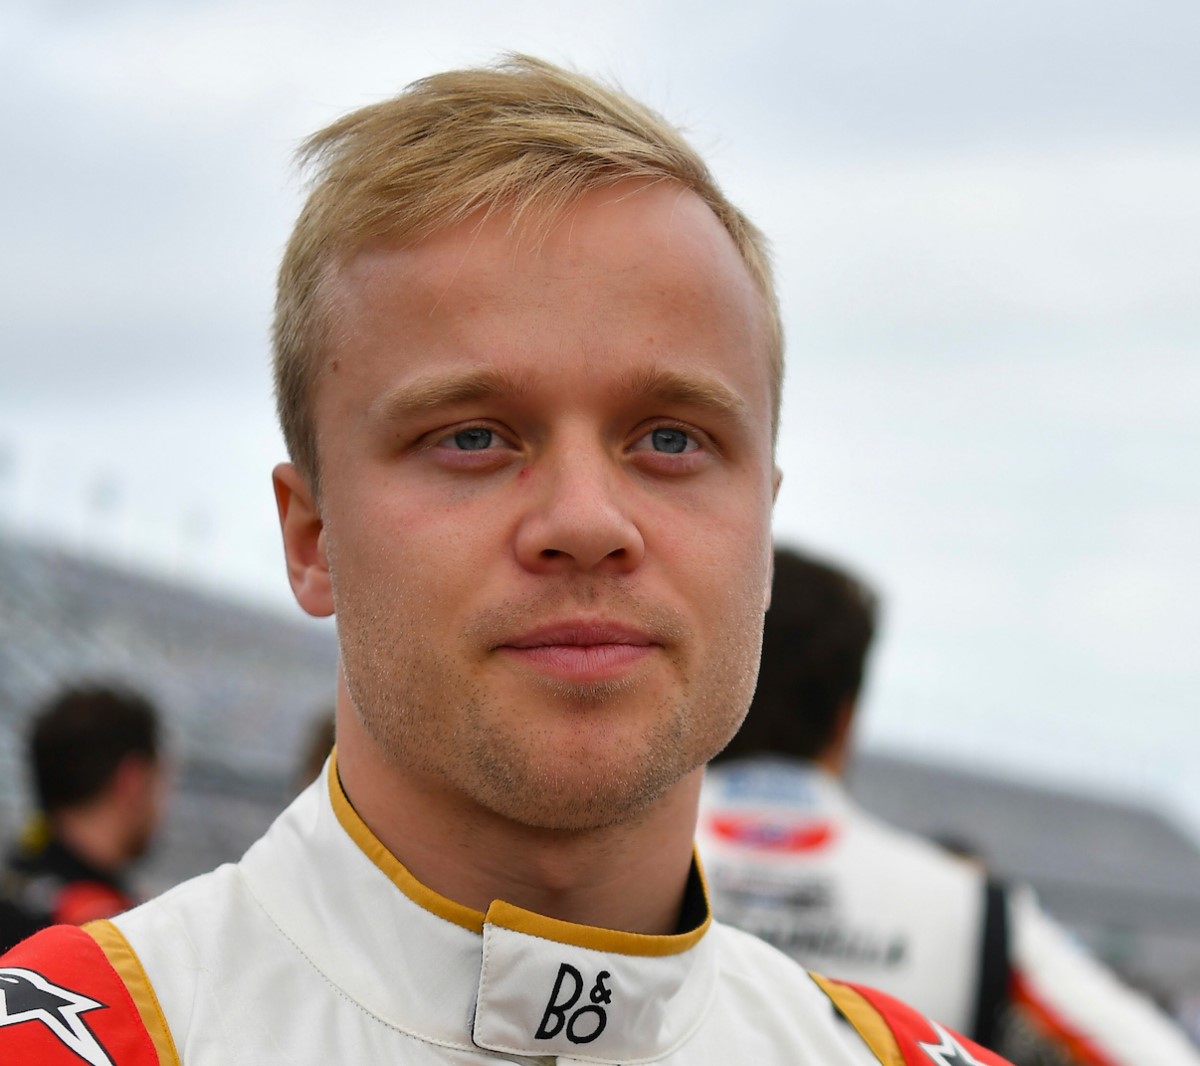 Psst, quick someone tell Rosenqvist that Formula E is full of F1 rejects, and never will be a path to F1